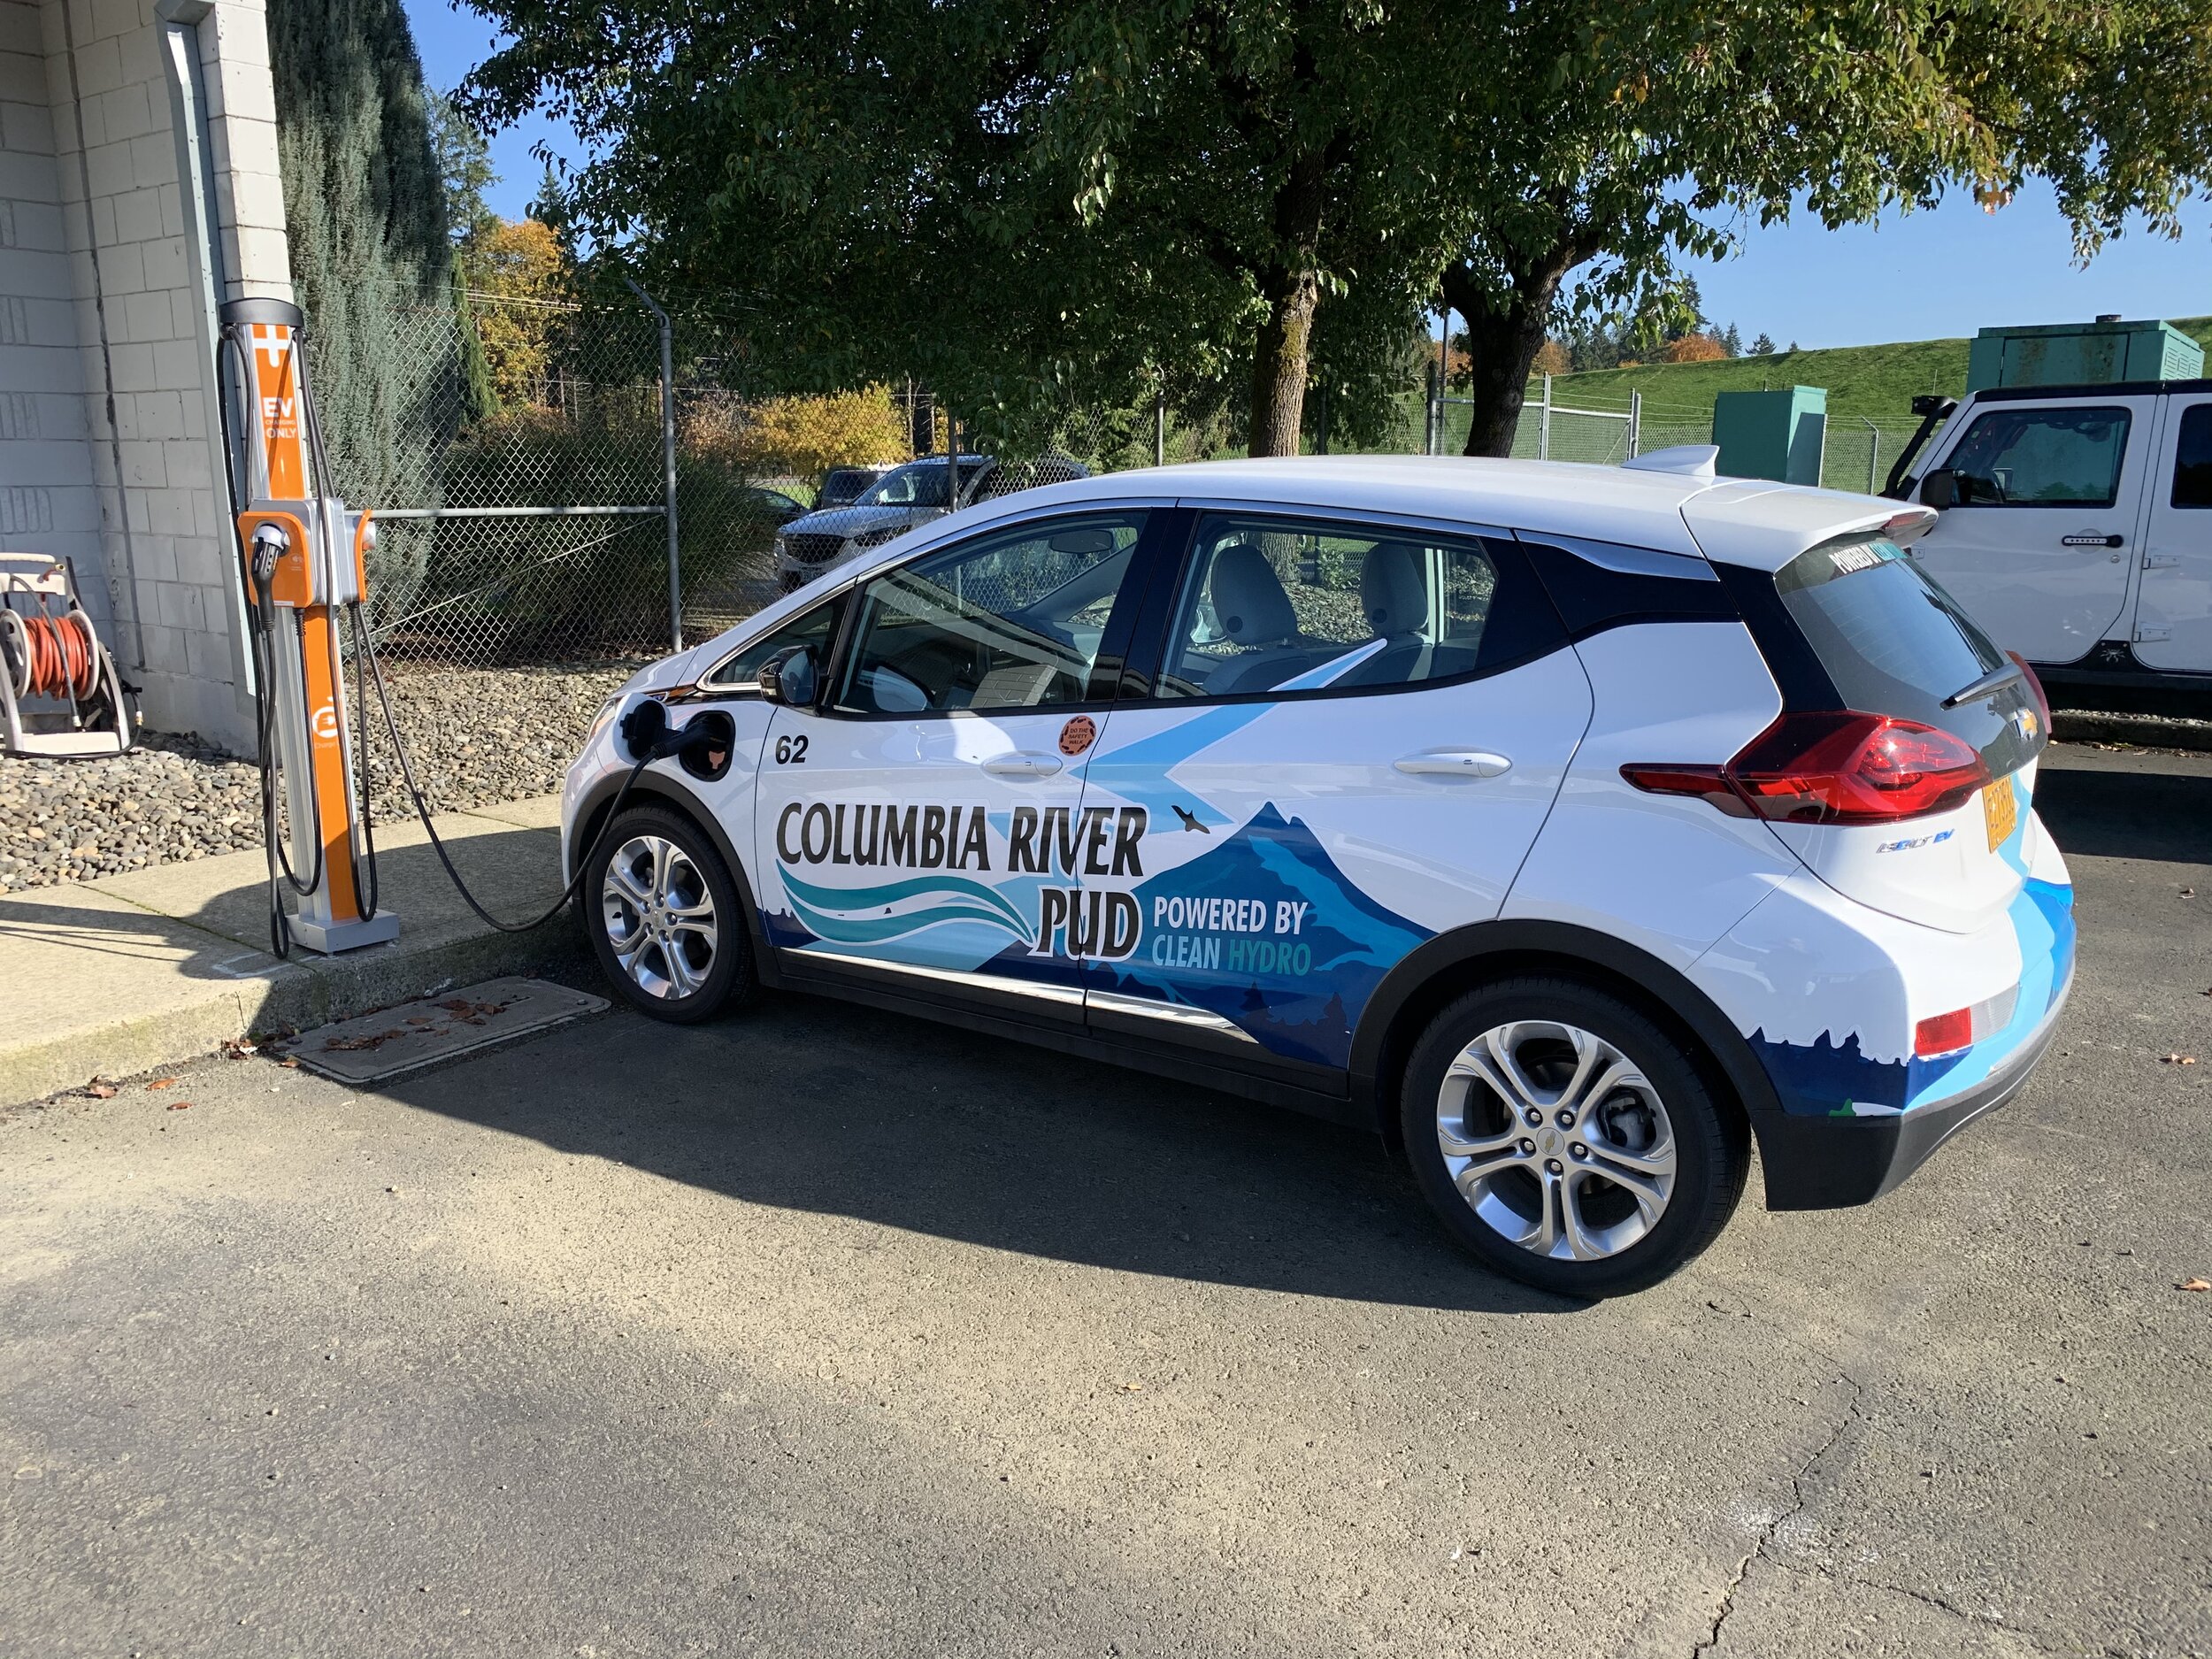 Columbia River PUD's fleet includes this all-electric Chevy Bolt